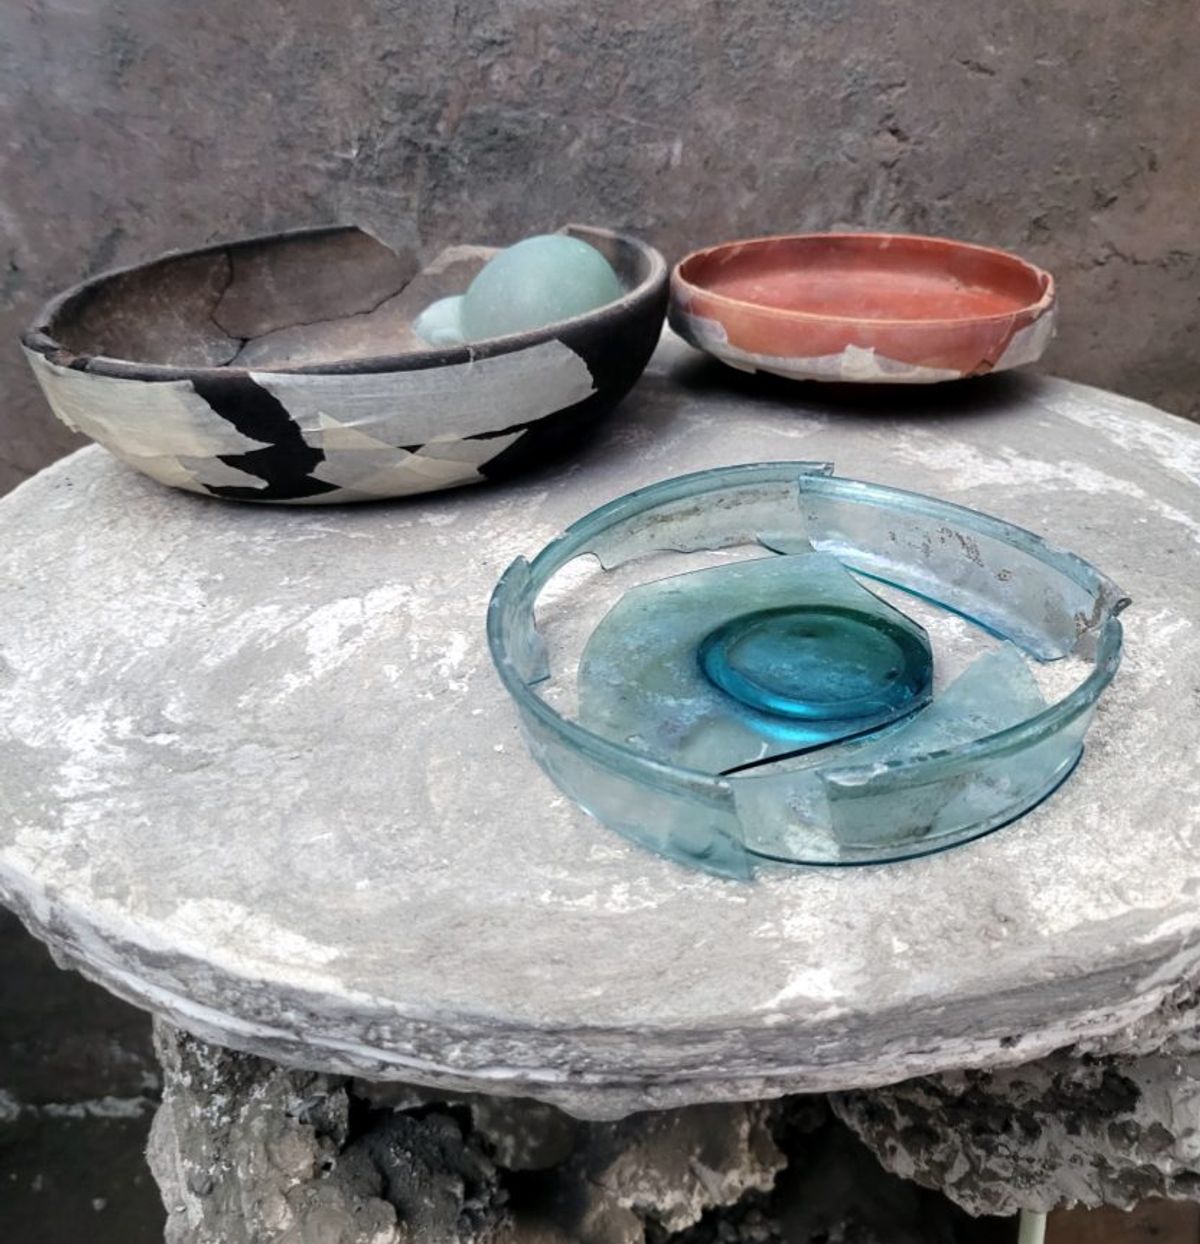 Vessels made from sigillata and glass were discovered during the excavation Courtesy of Pompeii Sites